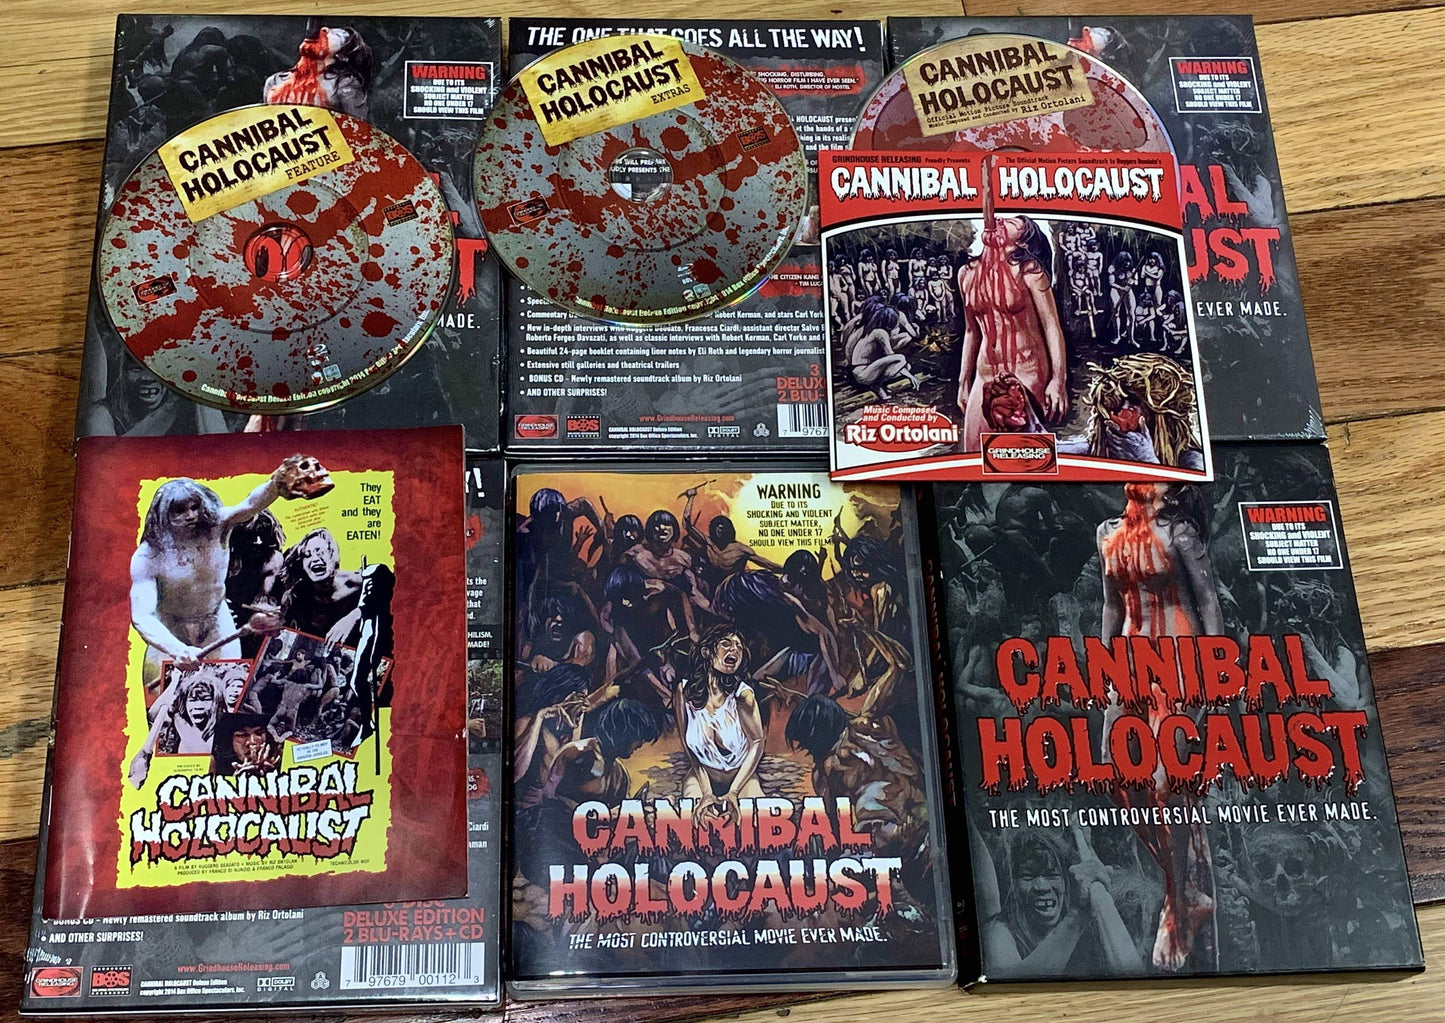 CANNIBAL HOLOCAUST (1980) 3 disc (2 Blu-ray + CD soundtrack) set: Embossed slipcover